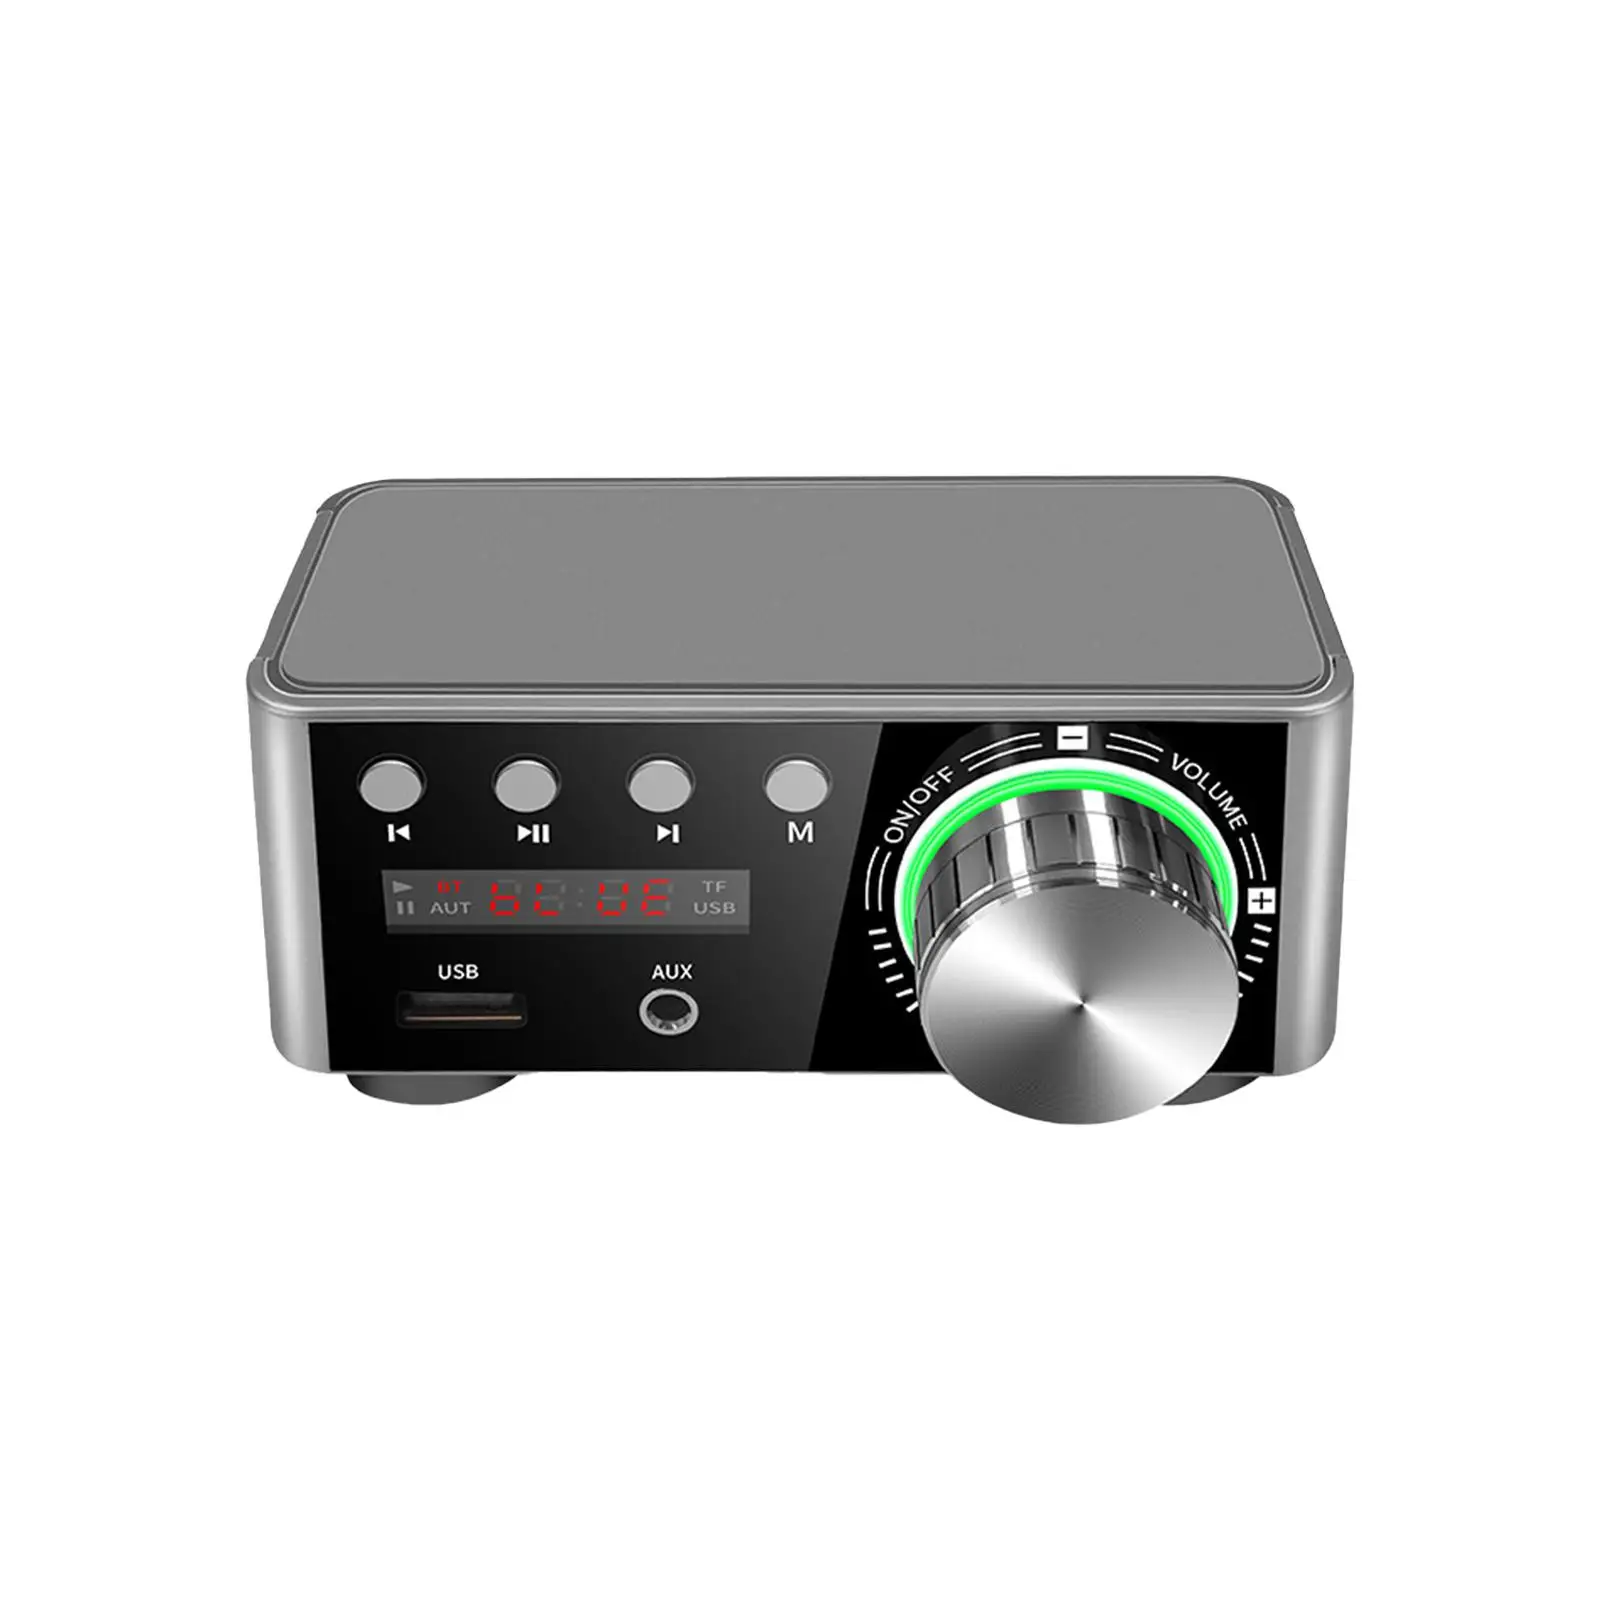 Digital Power Amplifier Mini HiFi Stereo Amp Speaker MP3 Sound Amplifier Speaker Amplifier 2.0 Channel with Power Adapter US